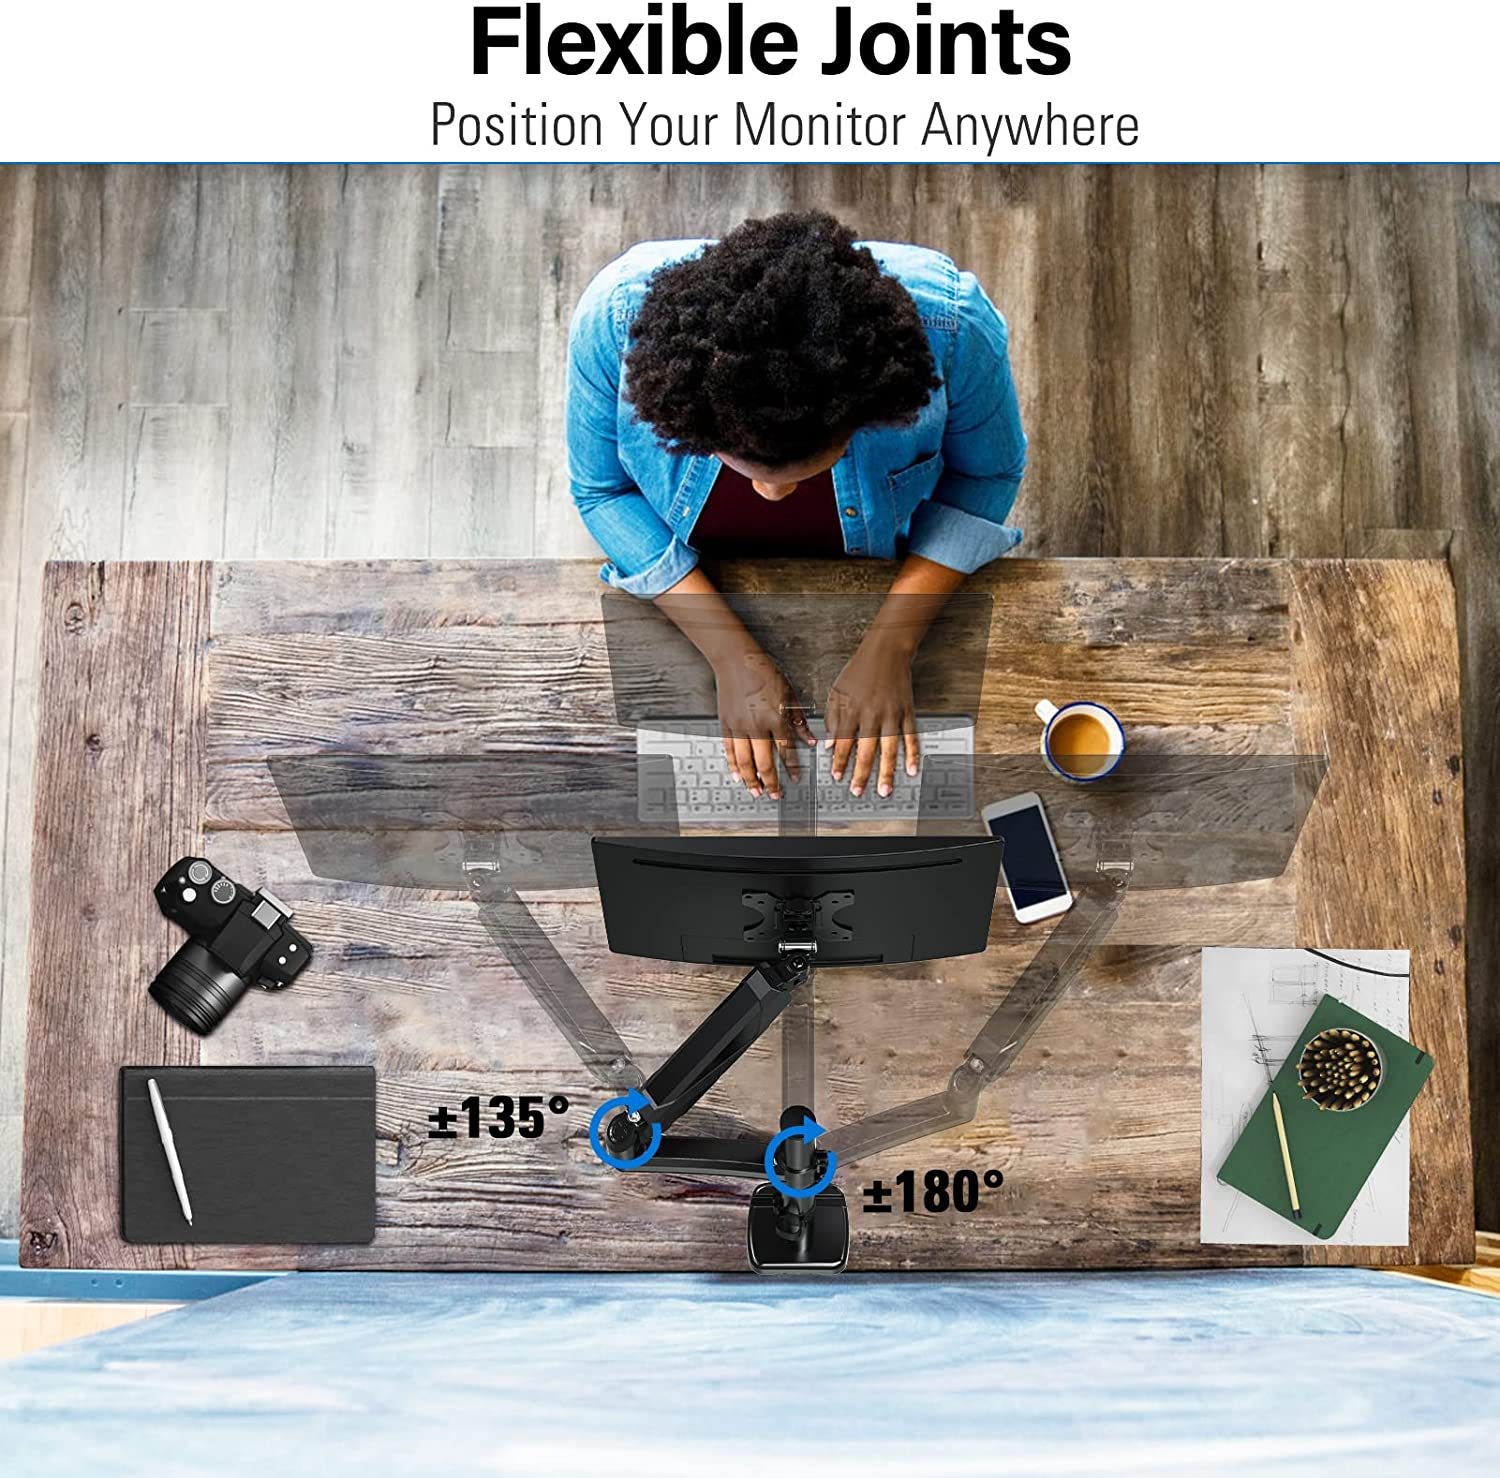 flexible joints helps position your monitor anywhere